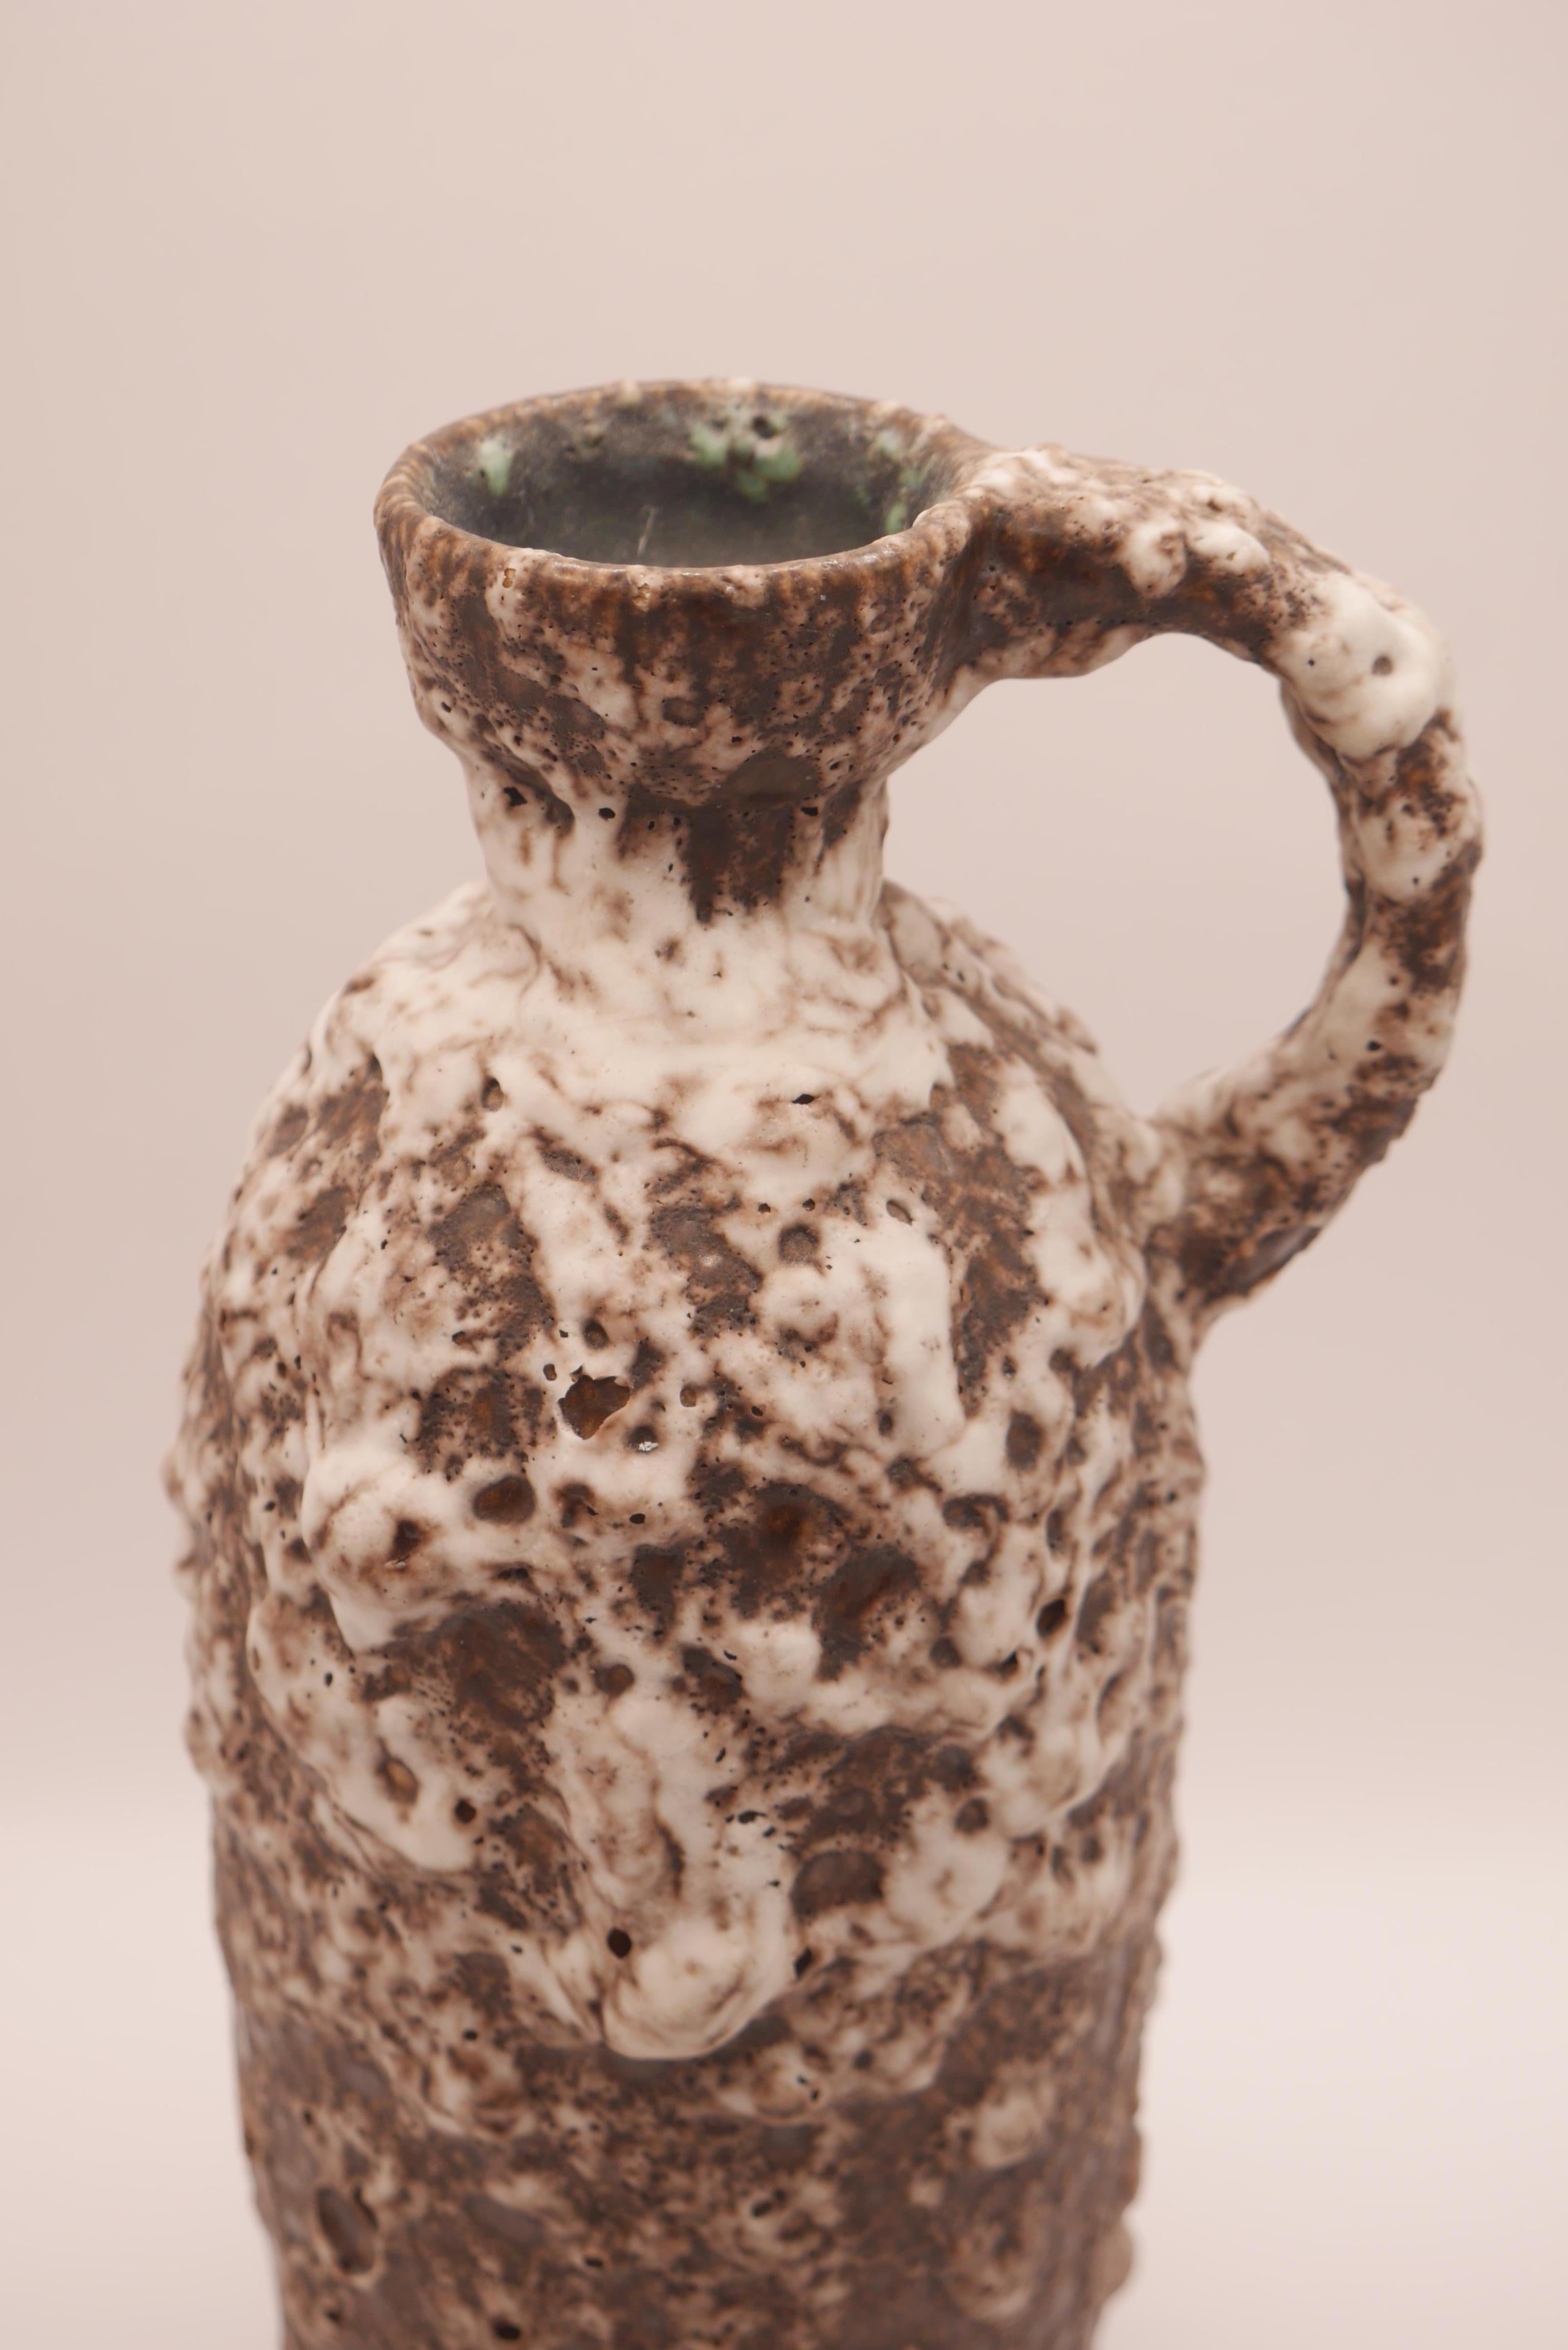 An unusual handled vase with a cracked, fat lava glaze in gray, brown and white.
Model number 327/3

West Germany art pottery:

Between 1949 and 1990s, the term West German Art Pottery became the way to describe German pottery because the